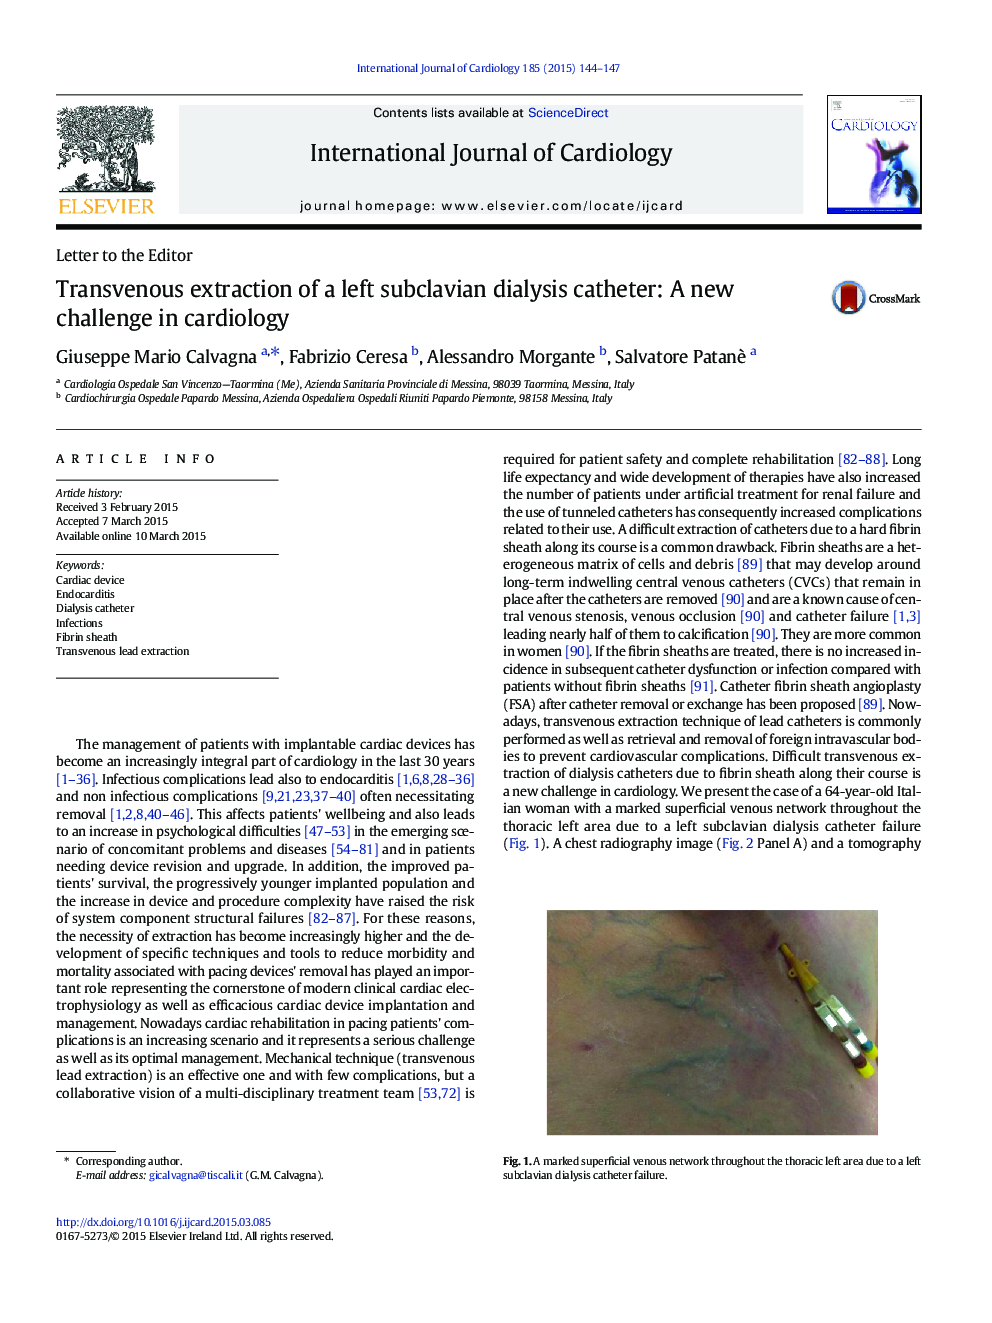 Transvenous extraction of a left subclavian dialysis catheter: A new challenge in cardiology